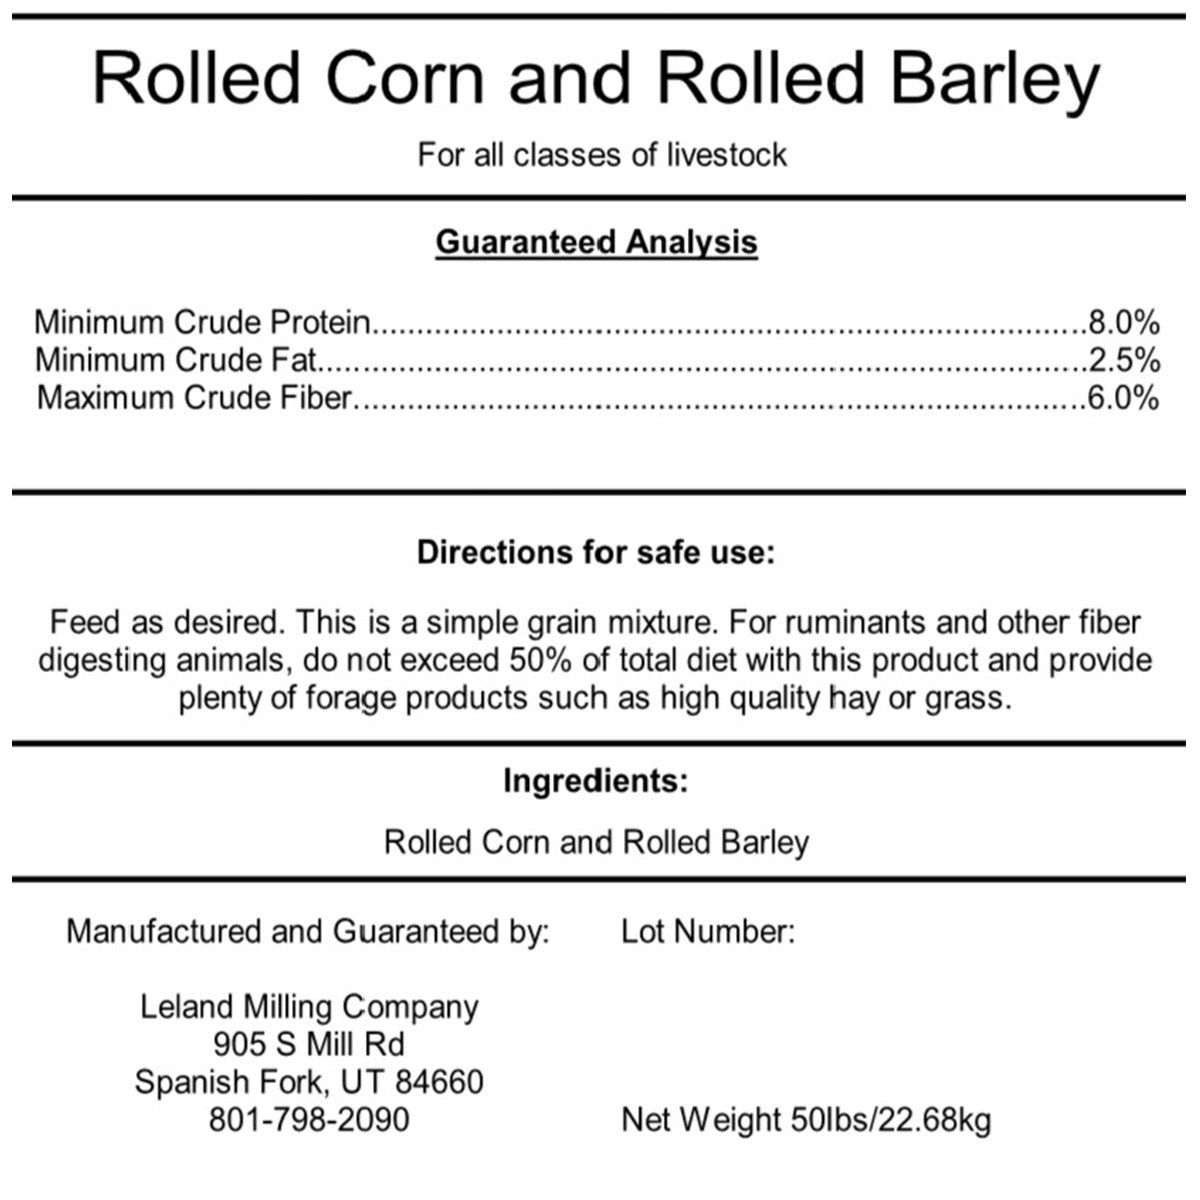 Rolled Corn and Rolled Barley